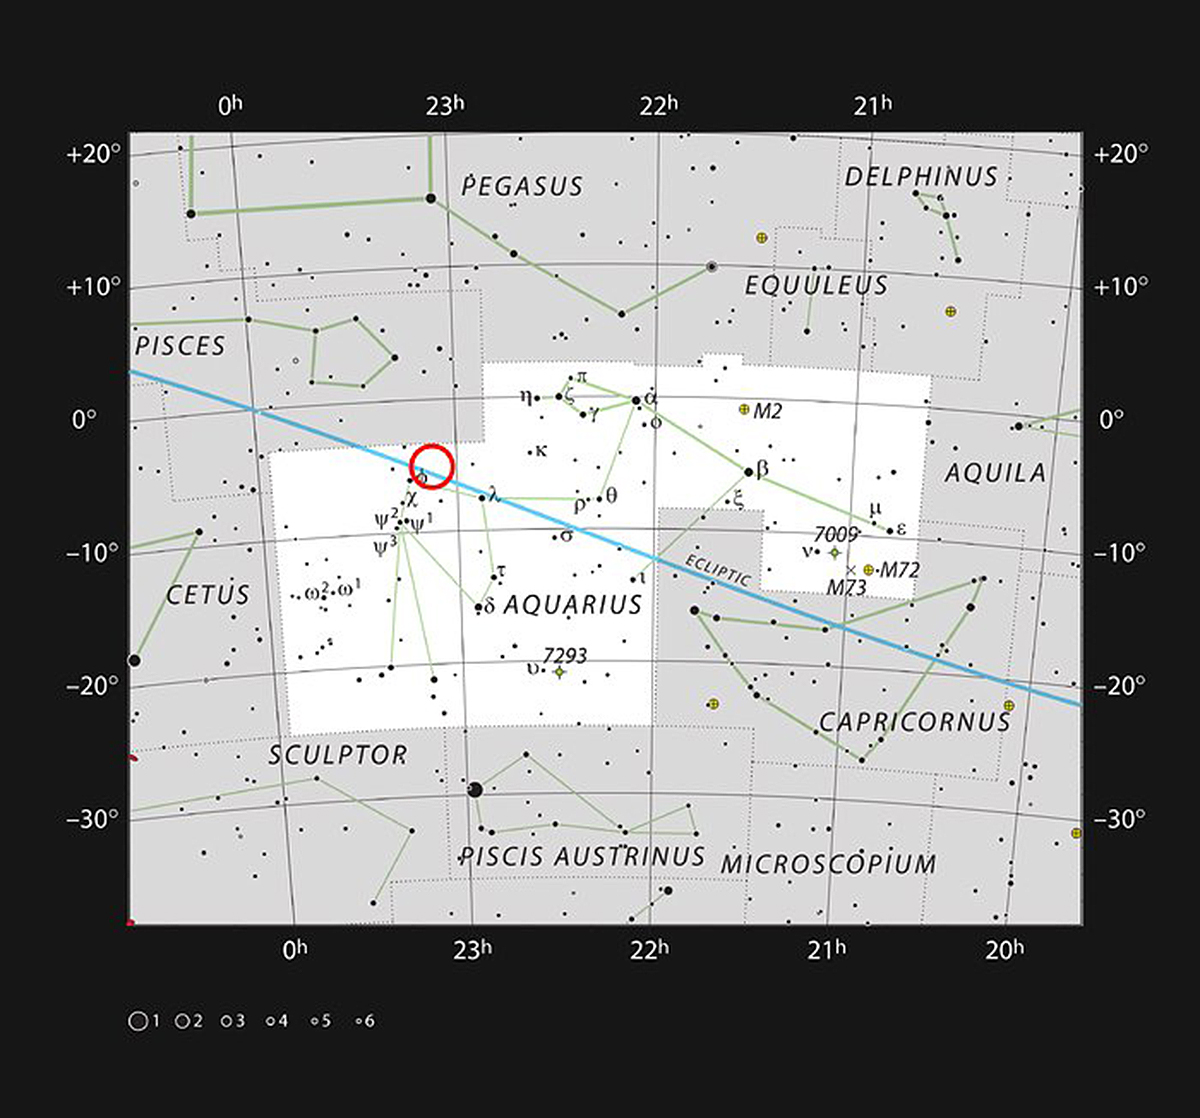 This chart shows the naked eye stars visible on a clear dark night in the sprawling constellation of Aquarius (The Water Carrier). The position of the faint and very red ultracool dwarf star TRAPPIST-1 is marked. Although it is relatively close to the Sun, it is very faint and not visible in small telescopes.